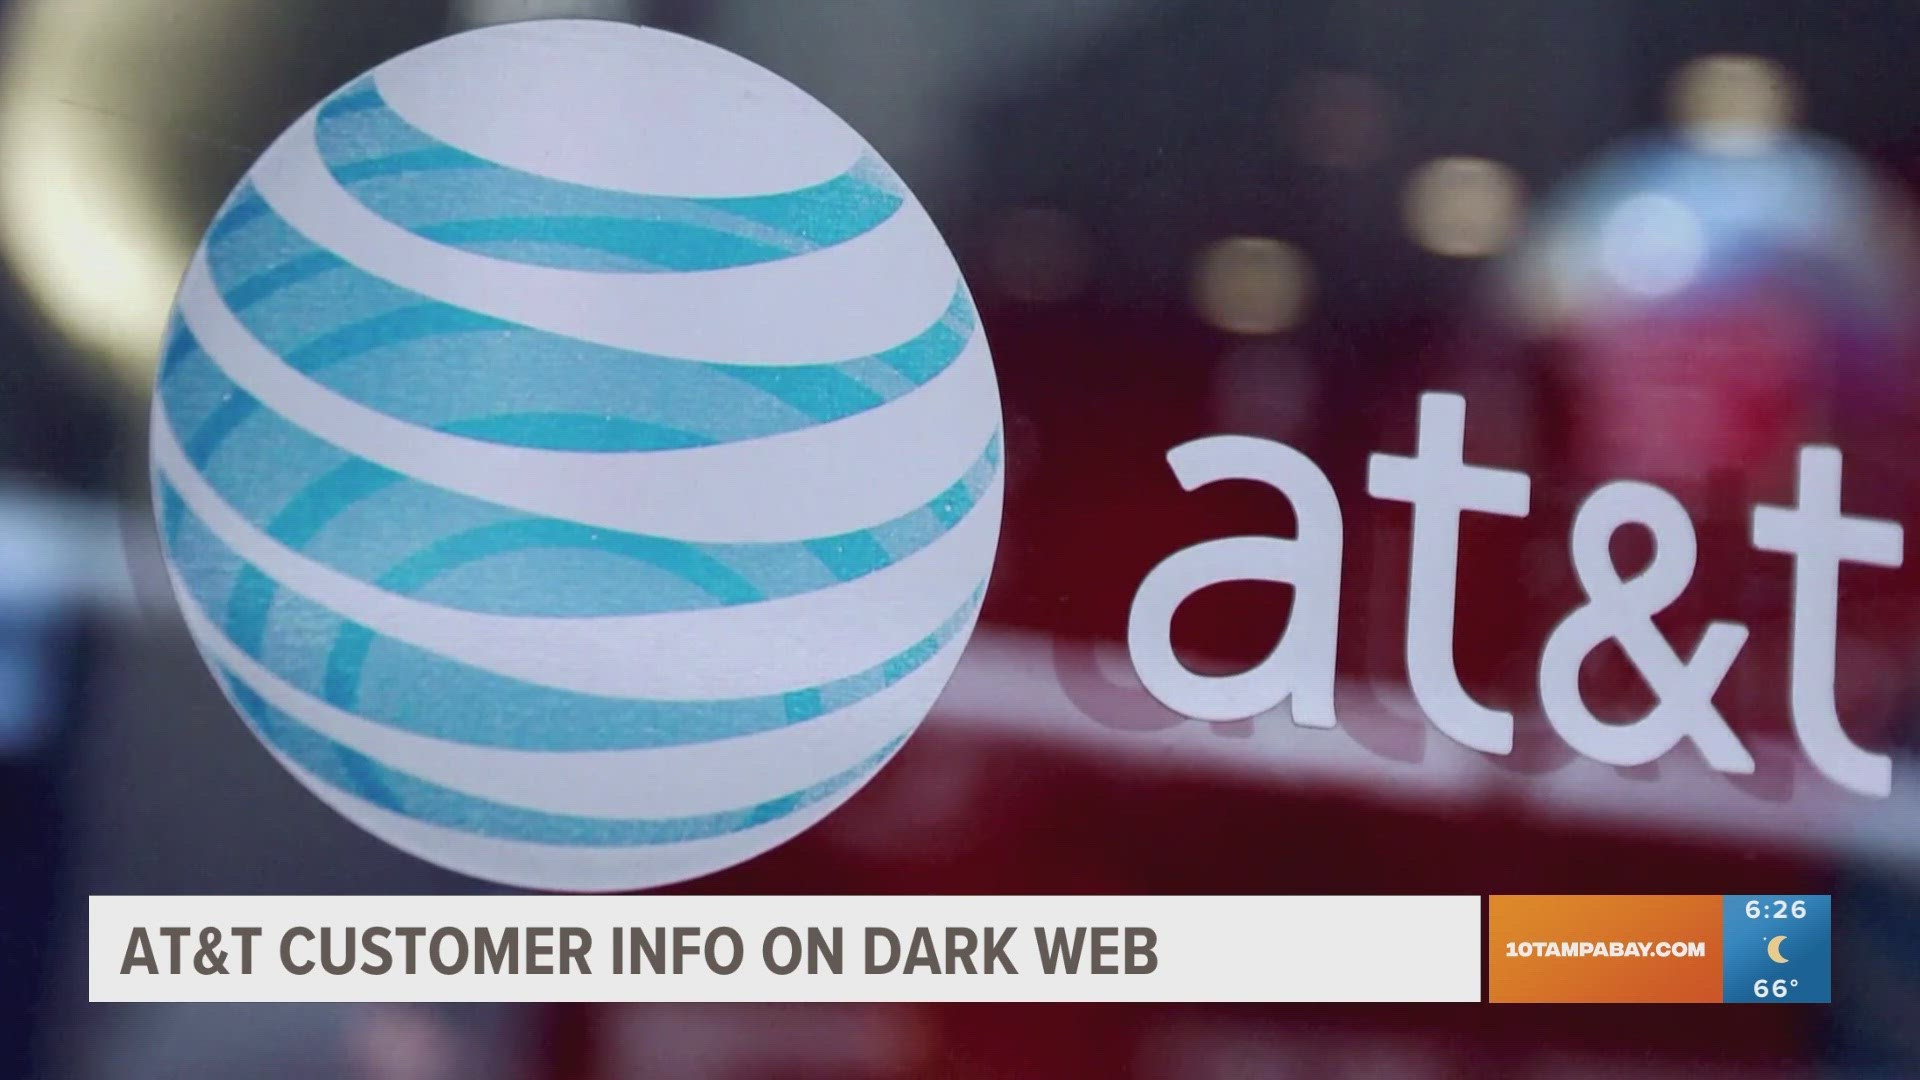 Things like social security numbers and mailing addresses may have been vulnerable to the hackers. AT&T says it has reset affected customer's passcodes.